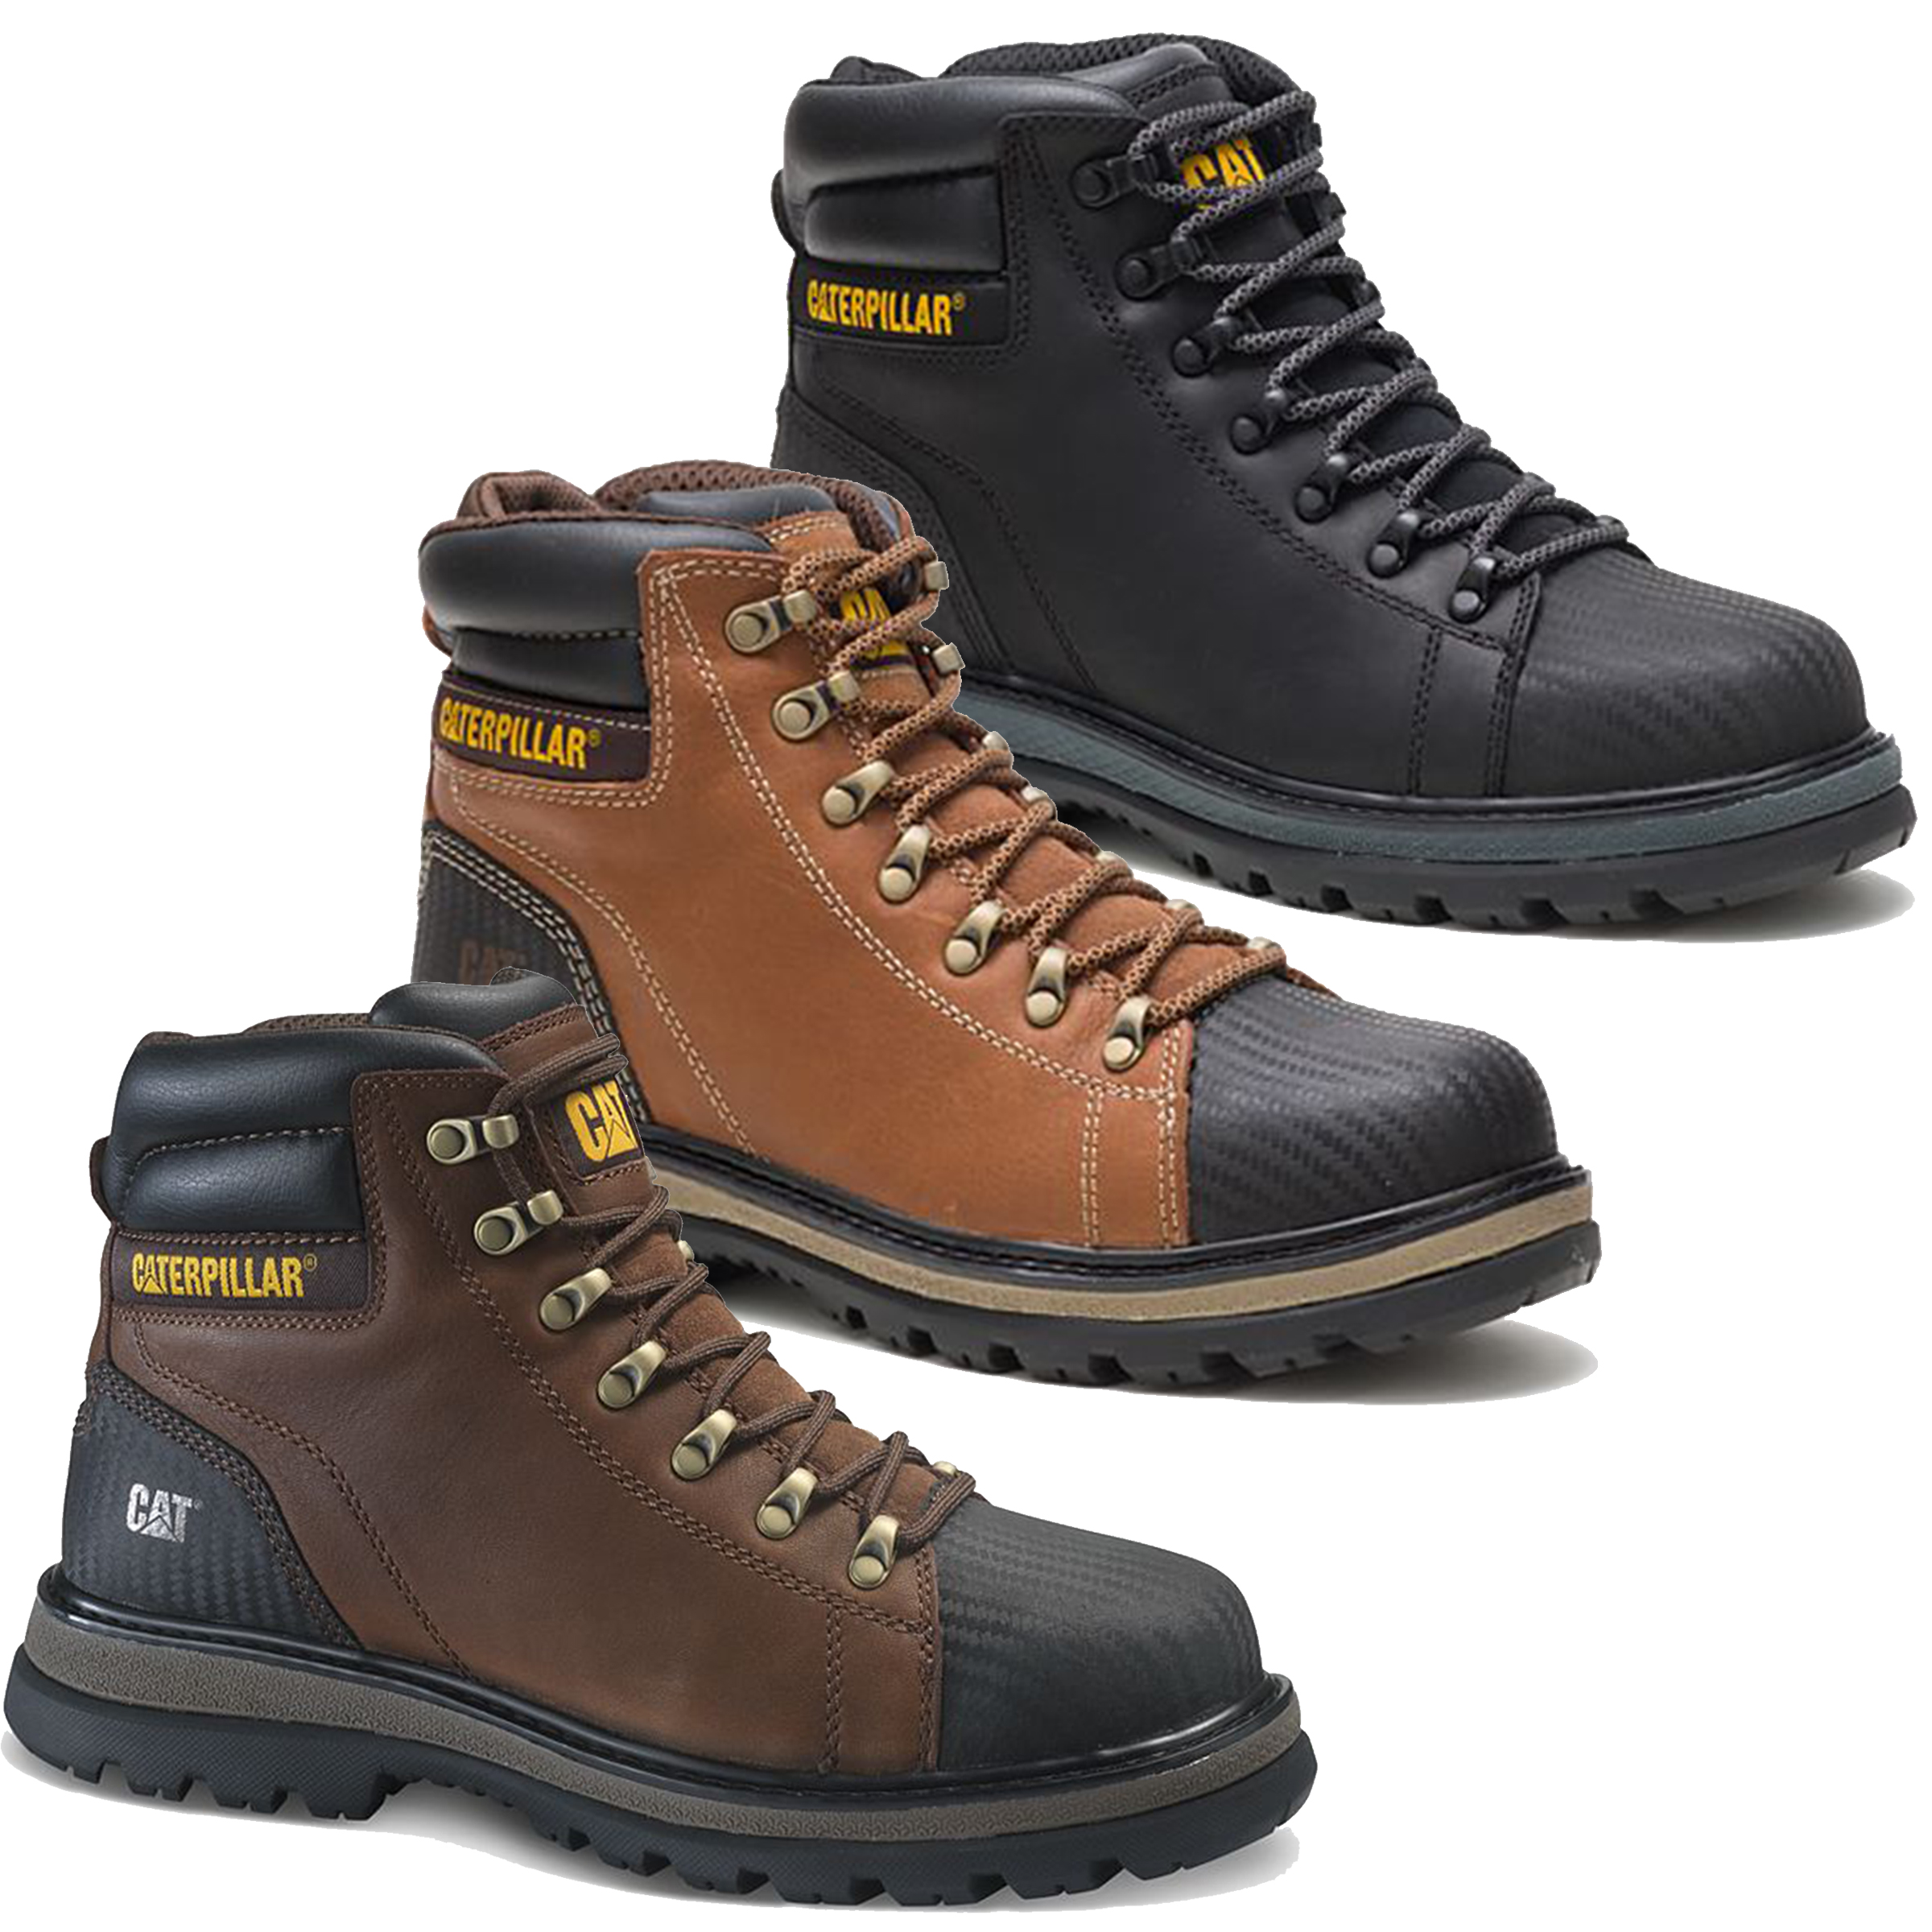 caterpillar s3 safety boots